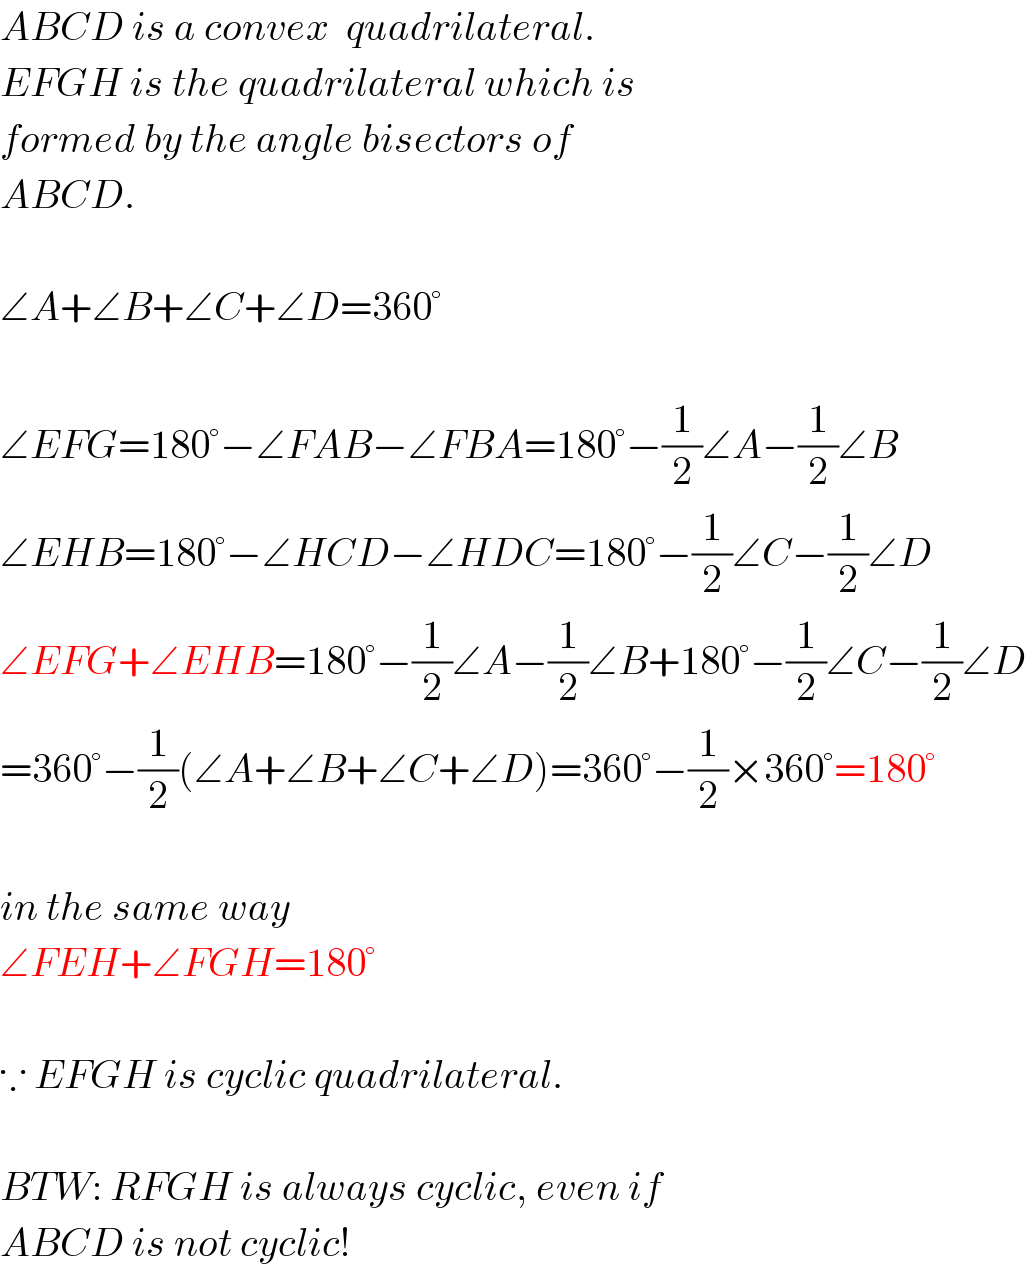 ABCD is a convex  quadrilateral.  EFGH is the quadrilateral which is  formed by the angle bisectors of  ABCD.    ∠A+∠B+∠C+∠D=360°    ∠EFG=180°−∠FAB−∠FBA=180°−(1/2)∠A−(1/2)∠B  ∠EHB=180°−∠HCD−∠HDC=180°−(1/2)∠C−(1/2)∠D  ∠EFG+∠EHB=180°−(1/2)∠A−(1/2)∠B+180°−(1/2)∠C−(1/2)∠D  =360°−(1/2)(∠A+∠B+∠C+∠D)=360°−(1/2)×360°=180°    in the same way  ∠FEH+∠FGH=180°    ∵ EFGH is cyclic quadrilateral.    BTW: RFGH is always cyclic, even if  ABCD is not cyclic!  